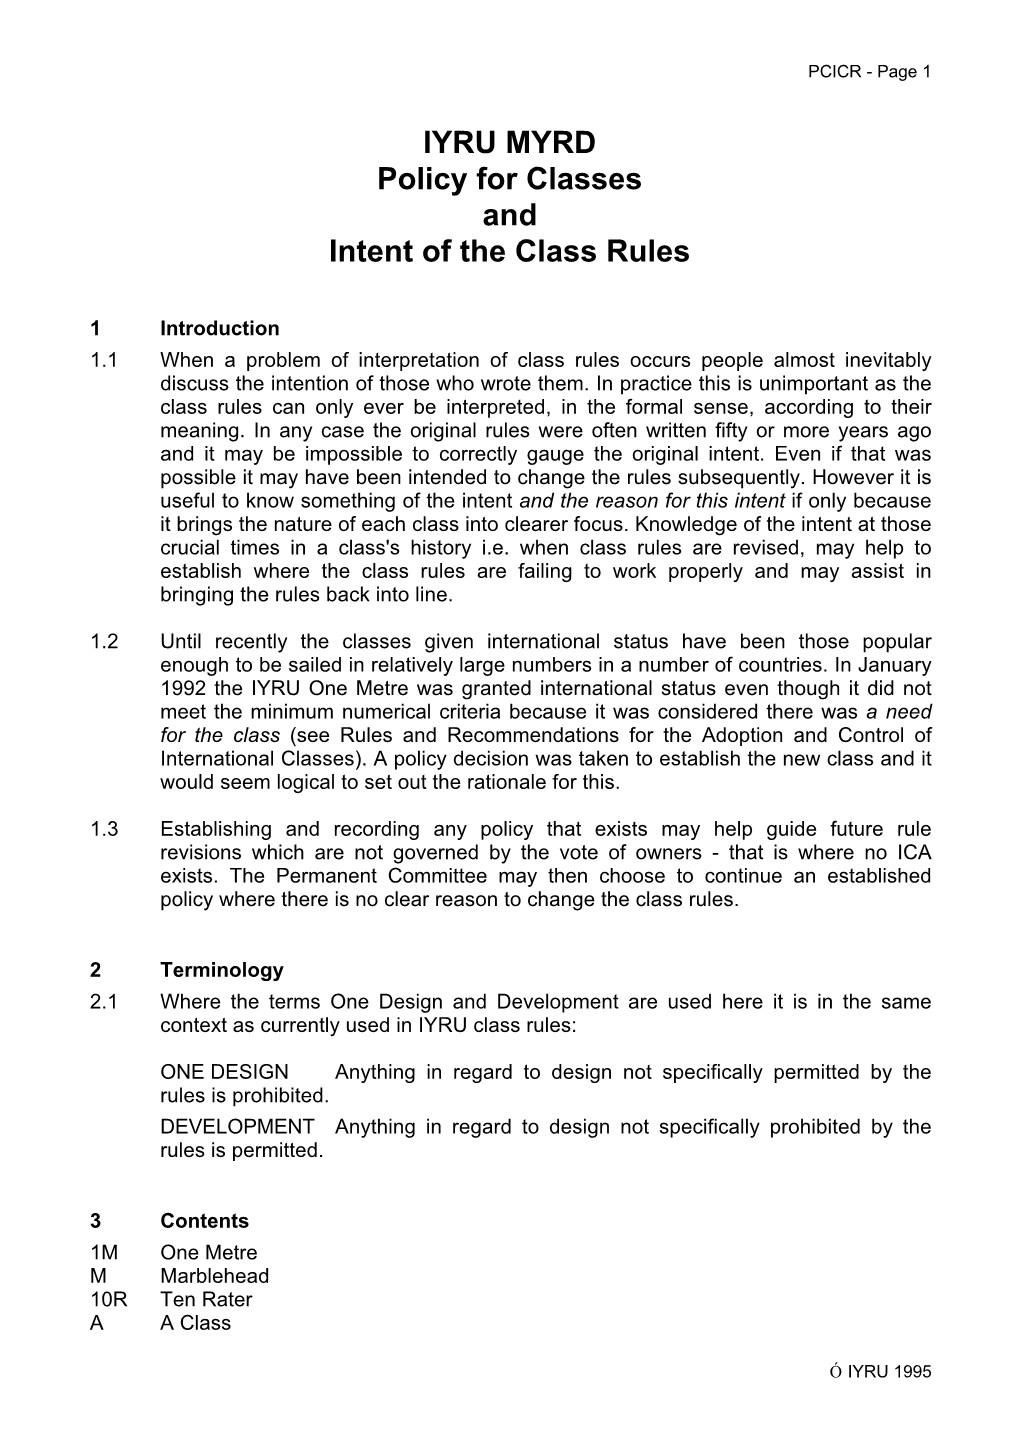 Policy for Classes and Intent of the Class Rules